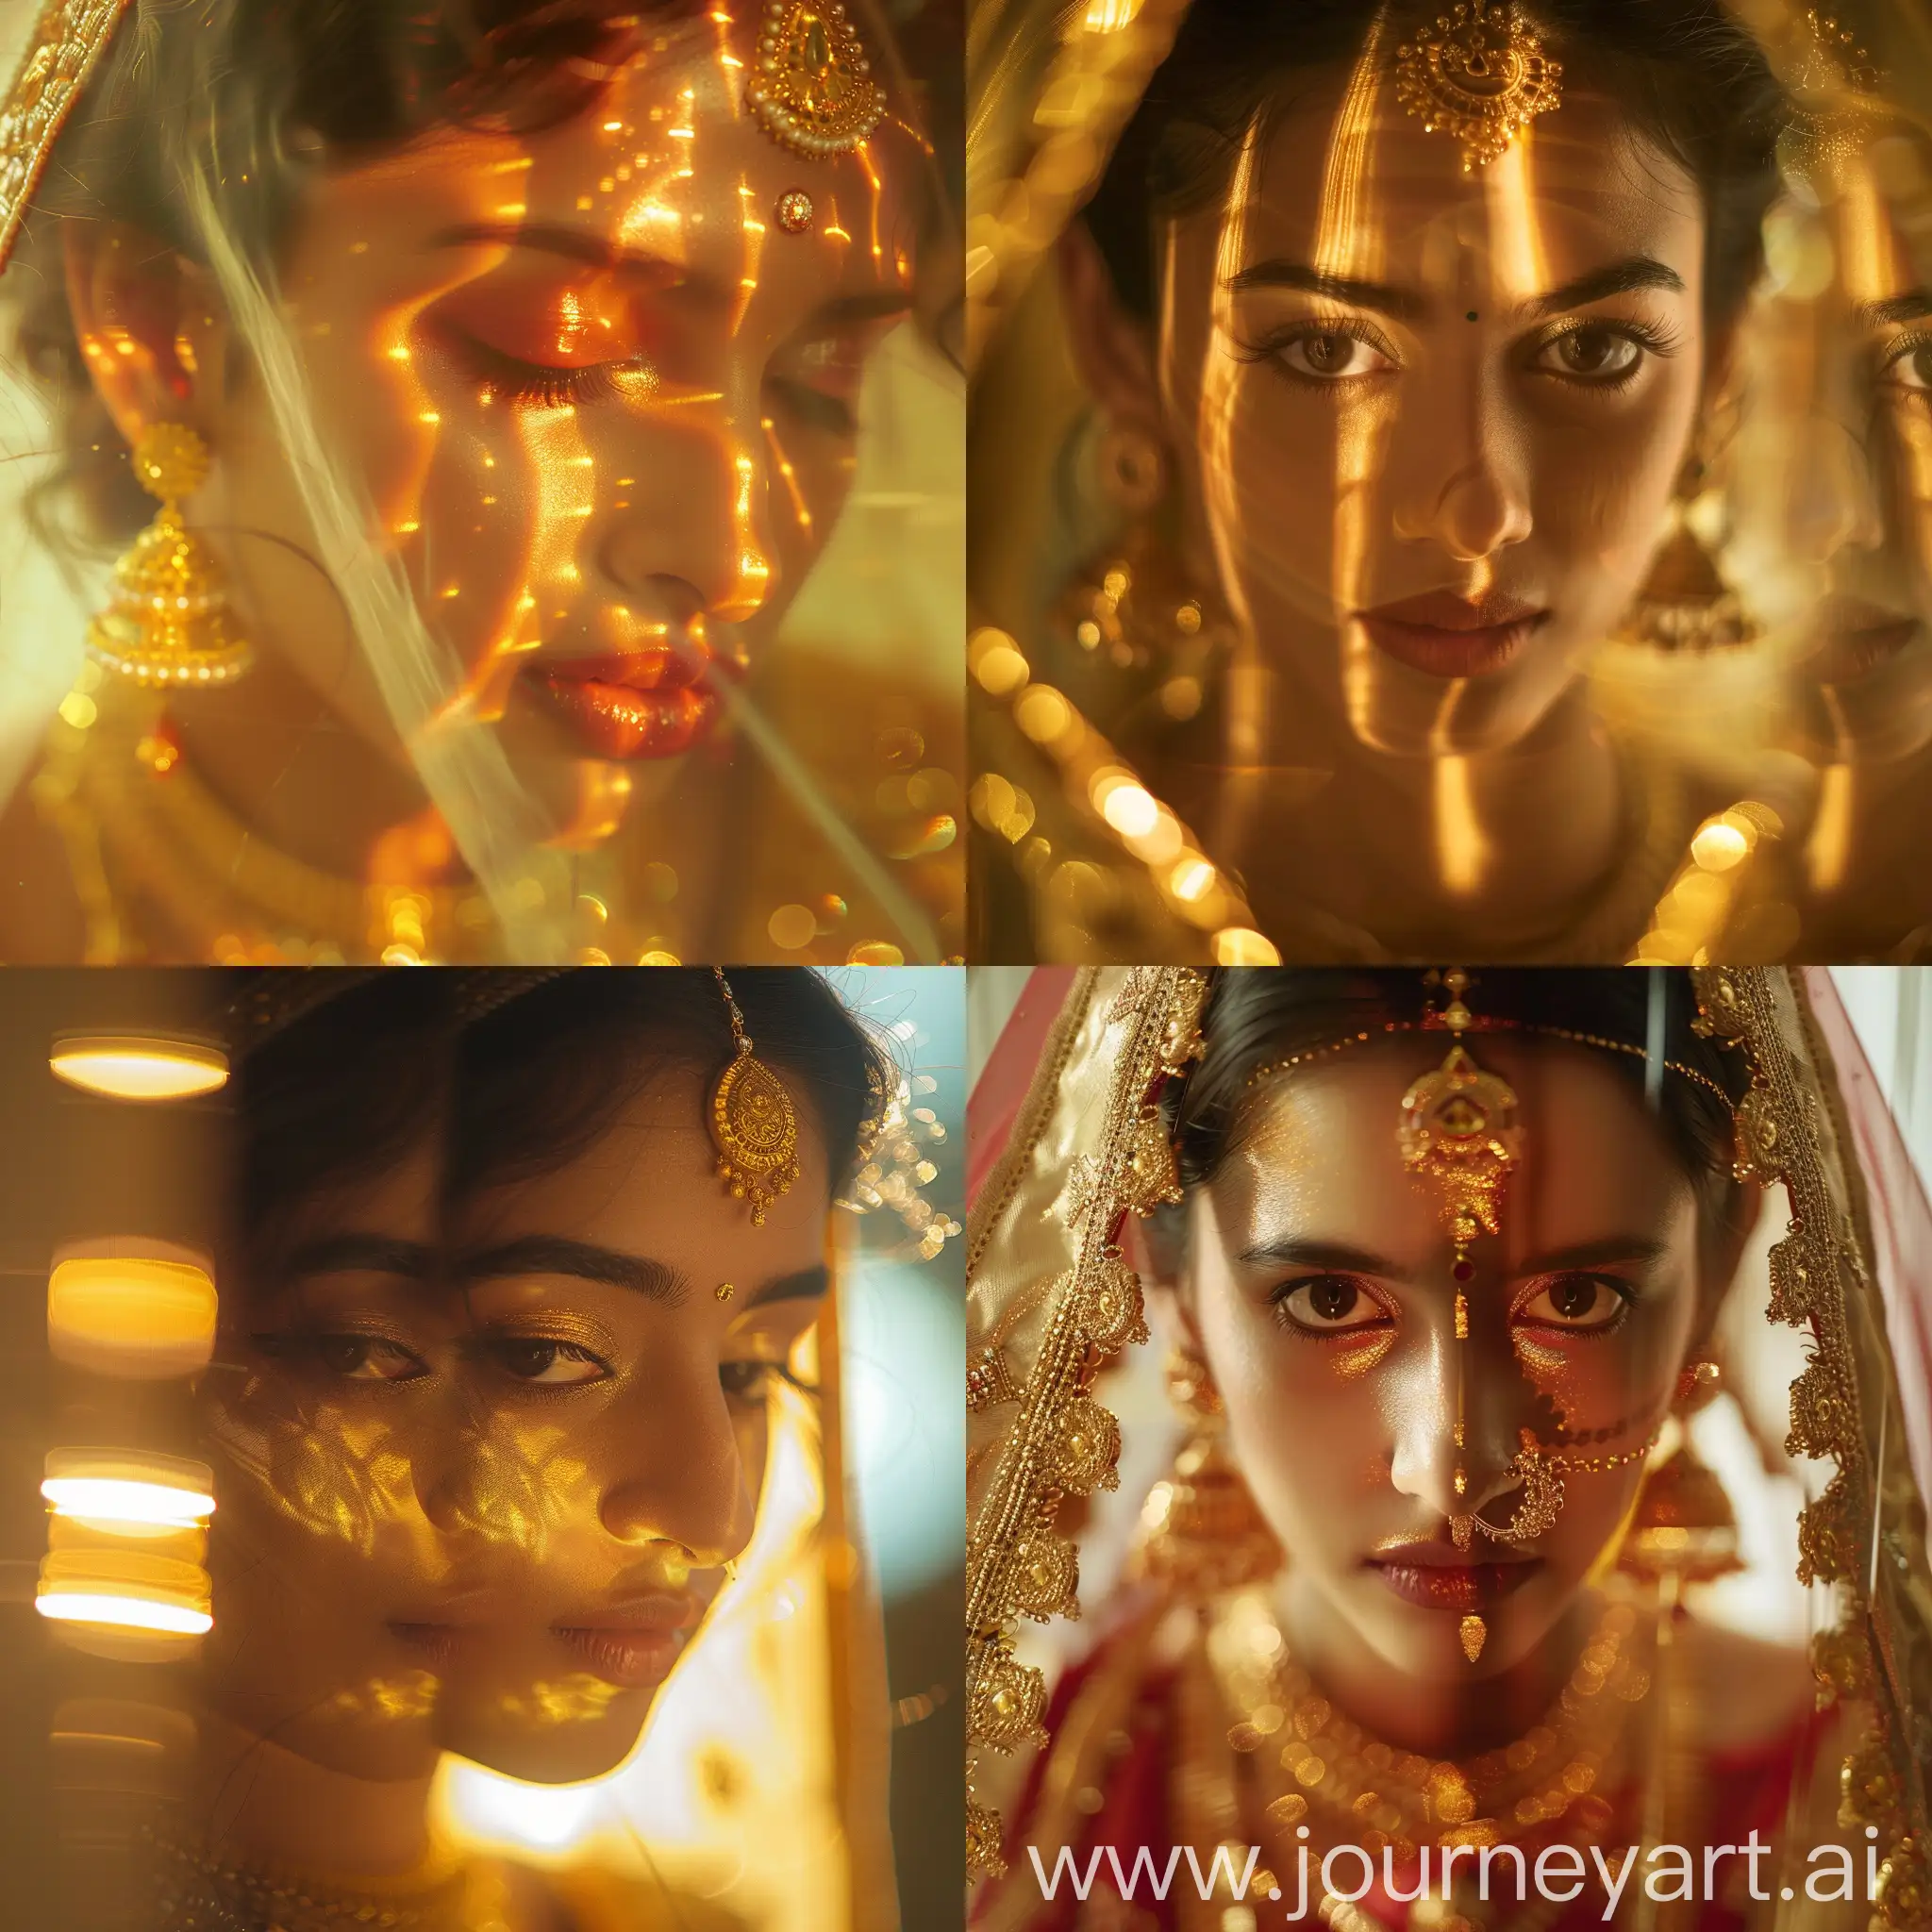 Elegant-South-Indian-Woman-in-Reflective-HyperRealistic-CloseUp-Photo-Shoot-with-Gold-Lighting